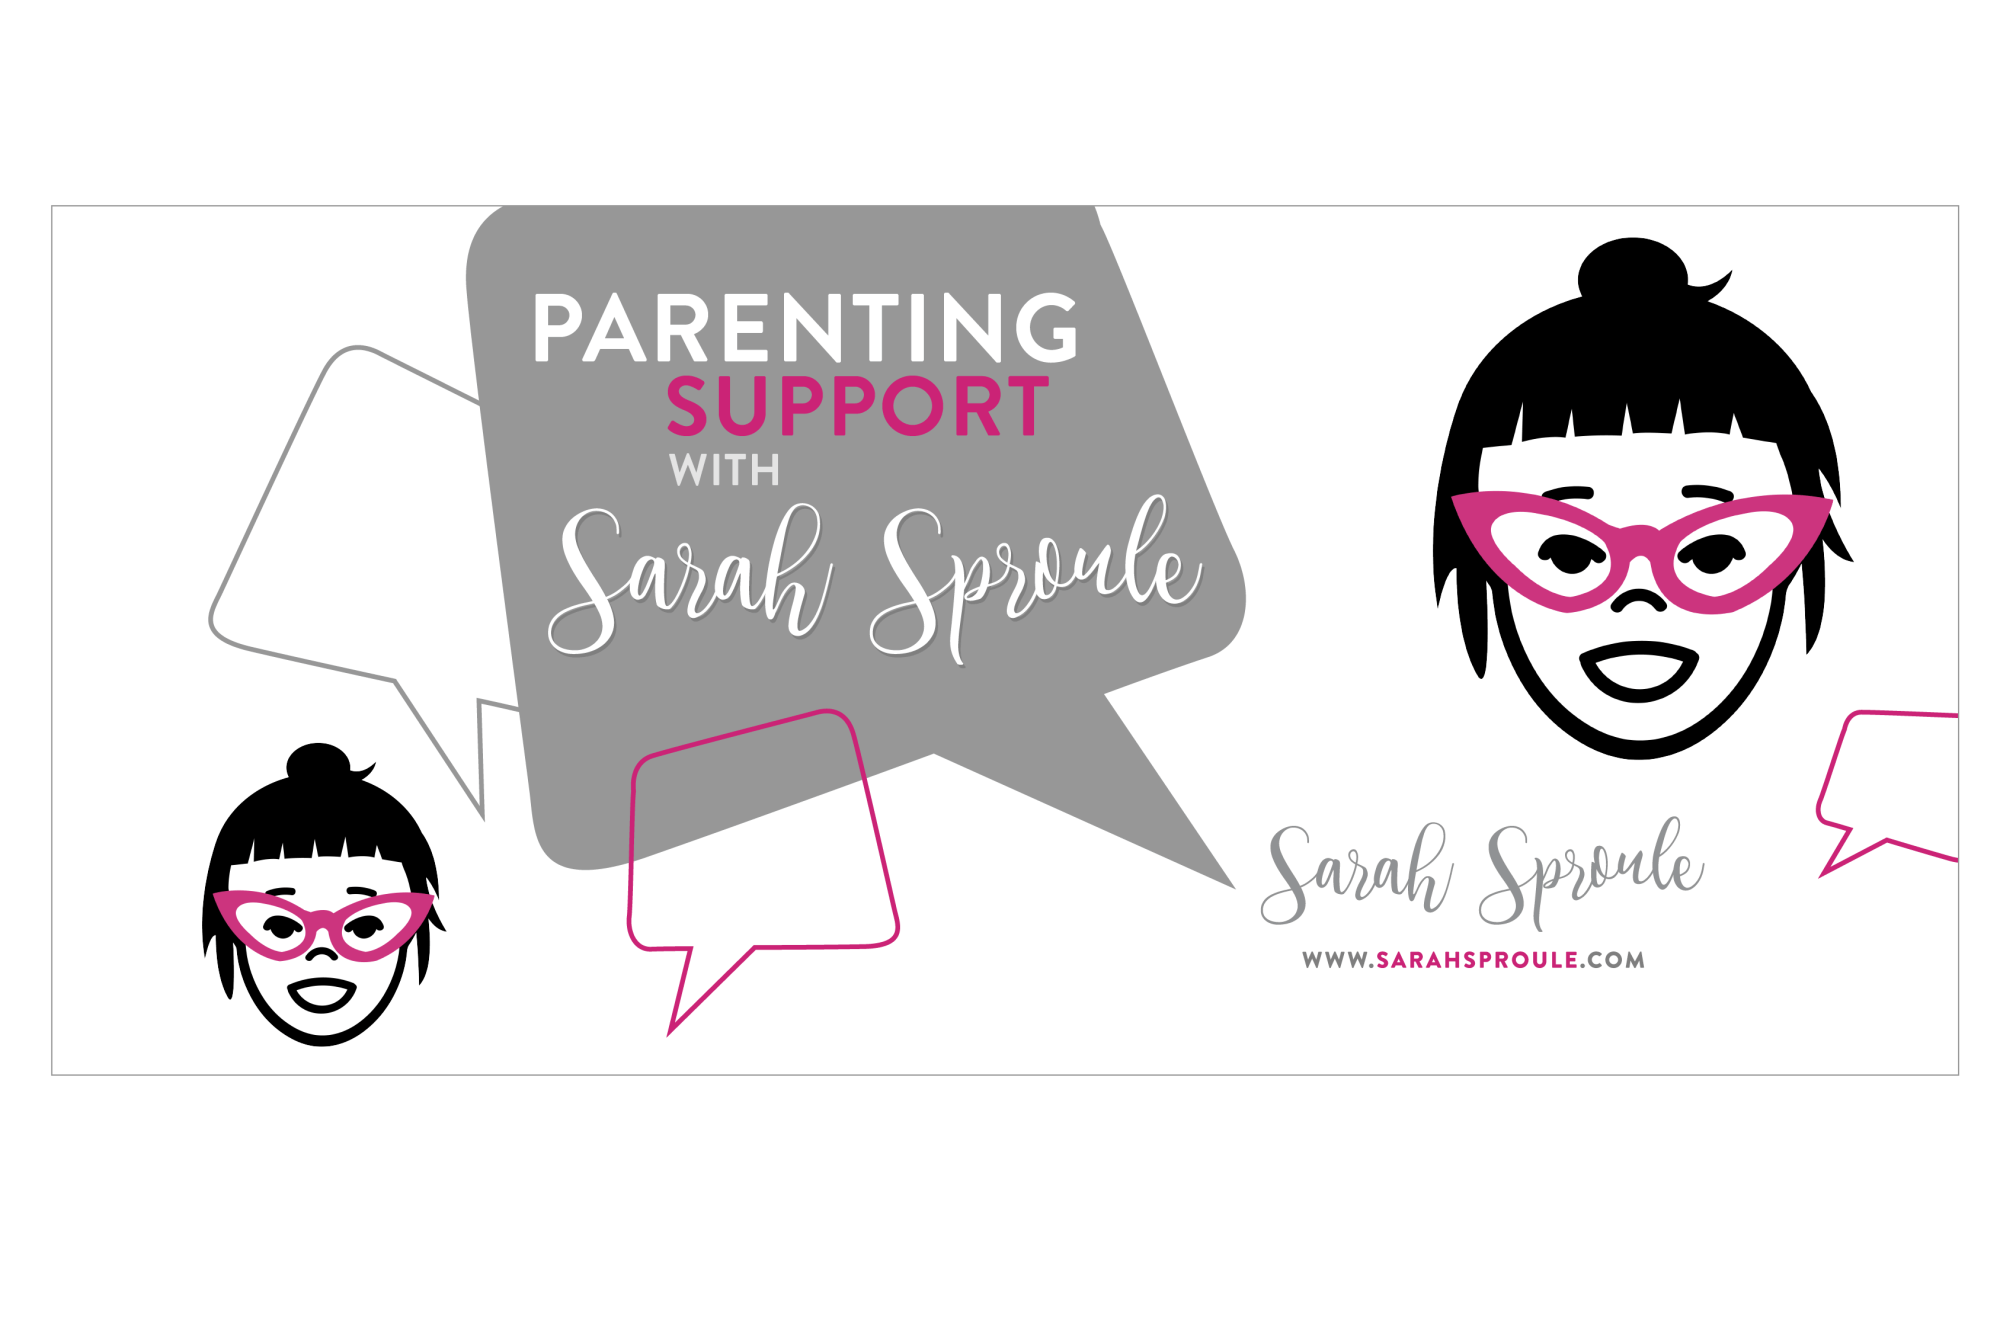 Sarah Sproule Parenting Support on Facebook